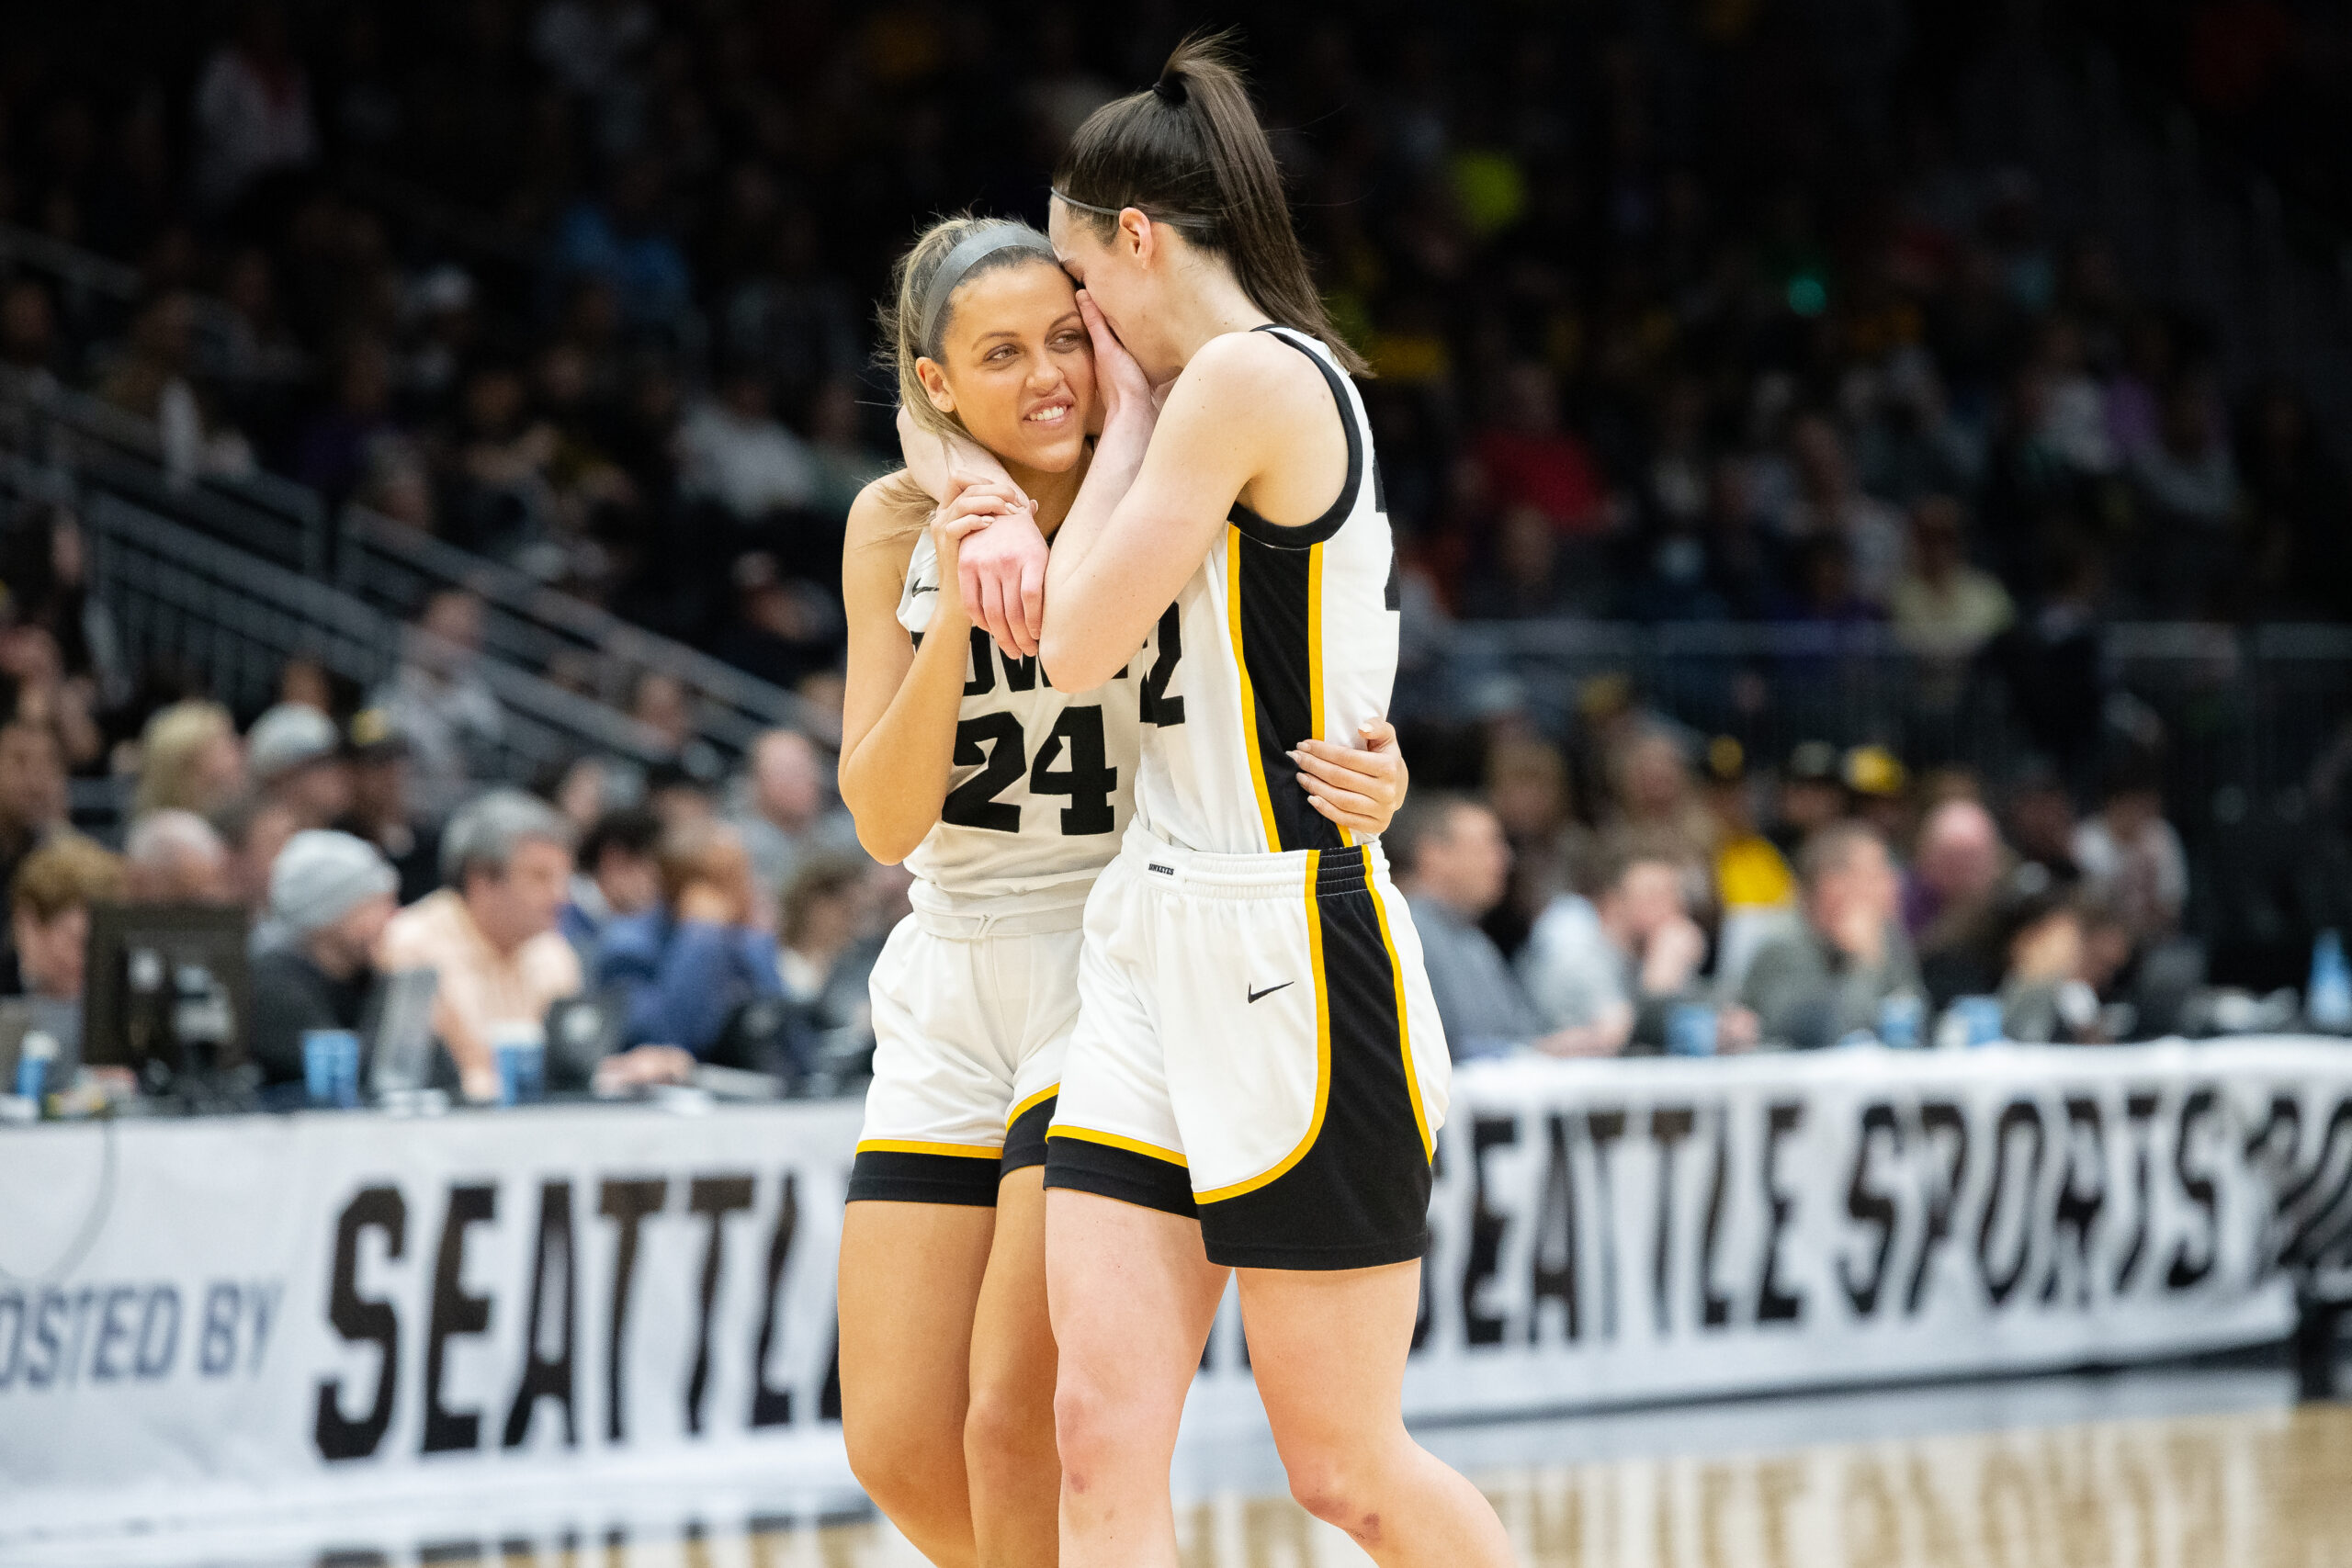 Caitlin Clark breaks records during historic March Madness run